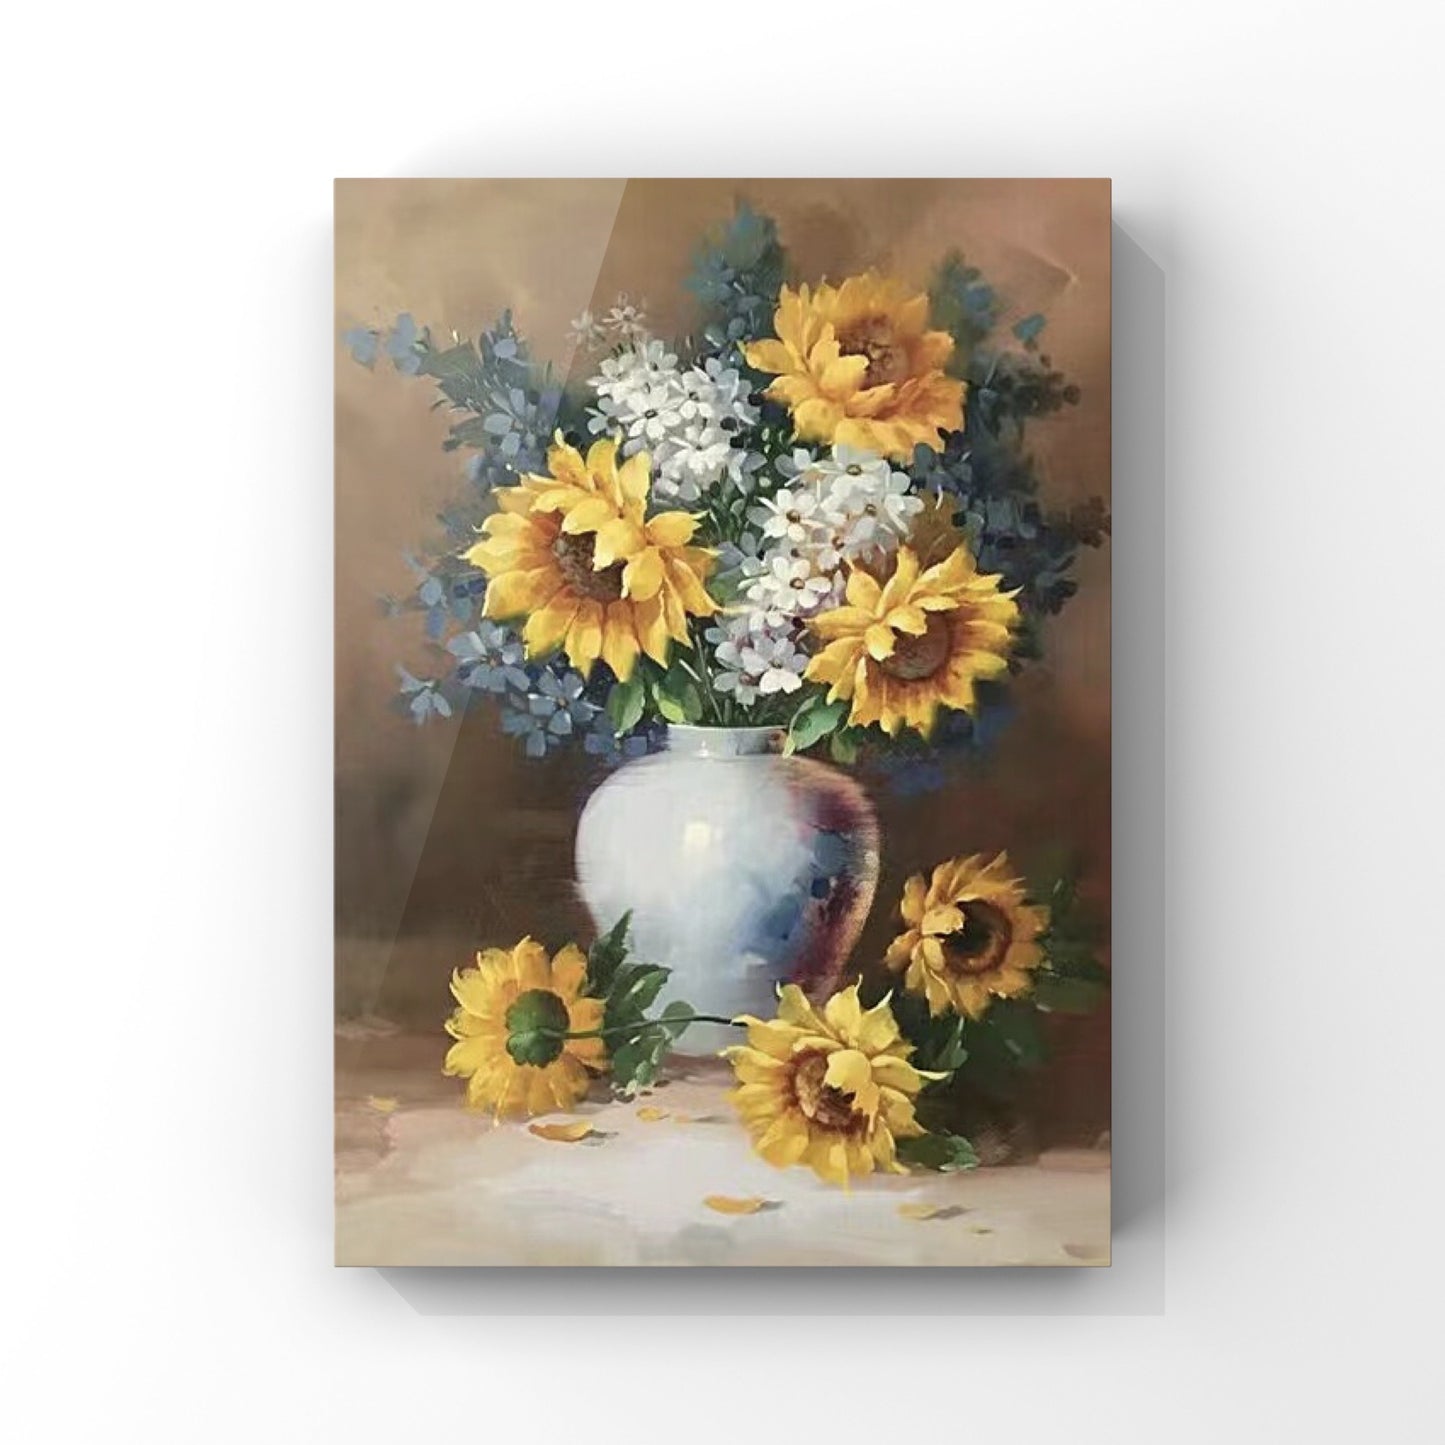 FLOWER PAINTING, CLASS SUNFLOWER, HAND-PAINTED CANVAS